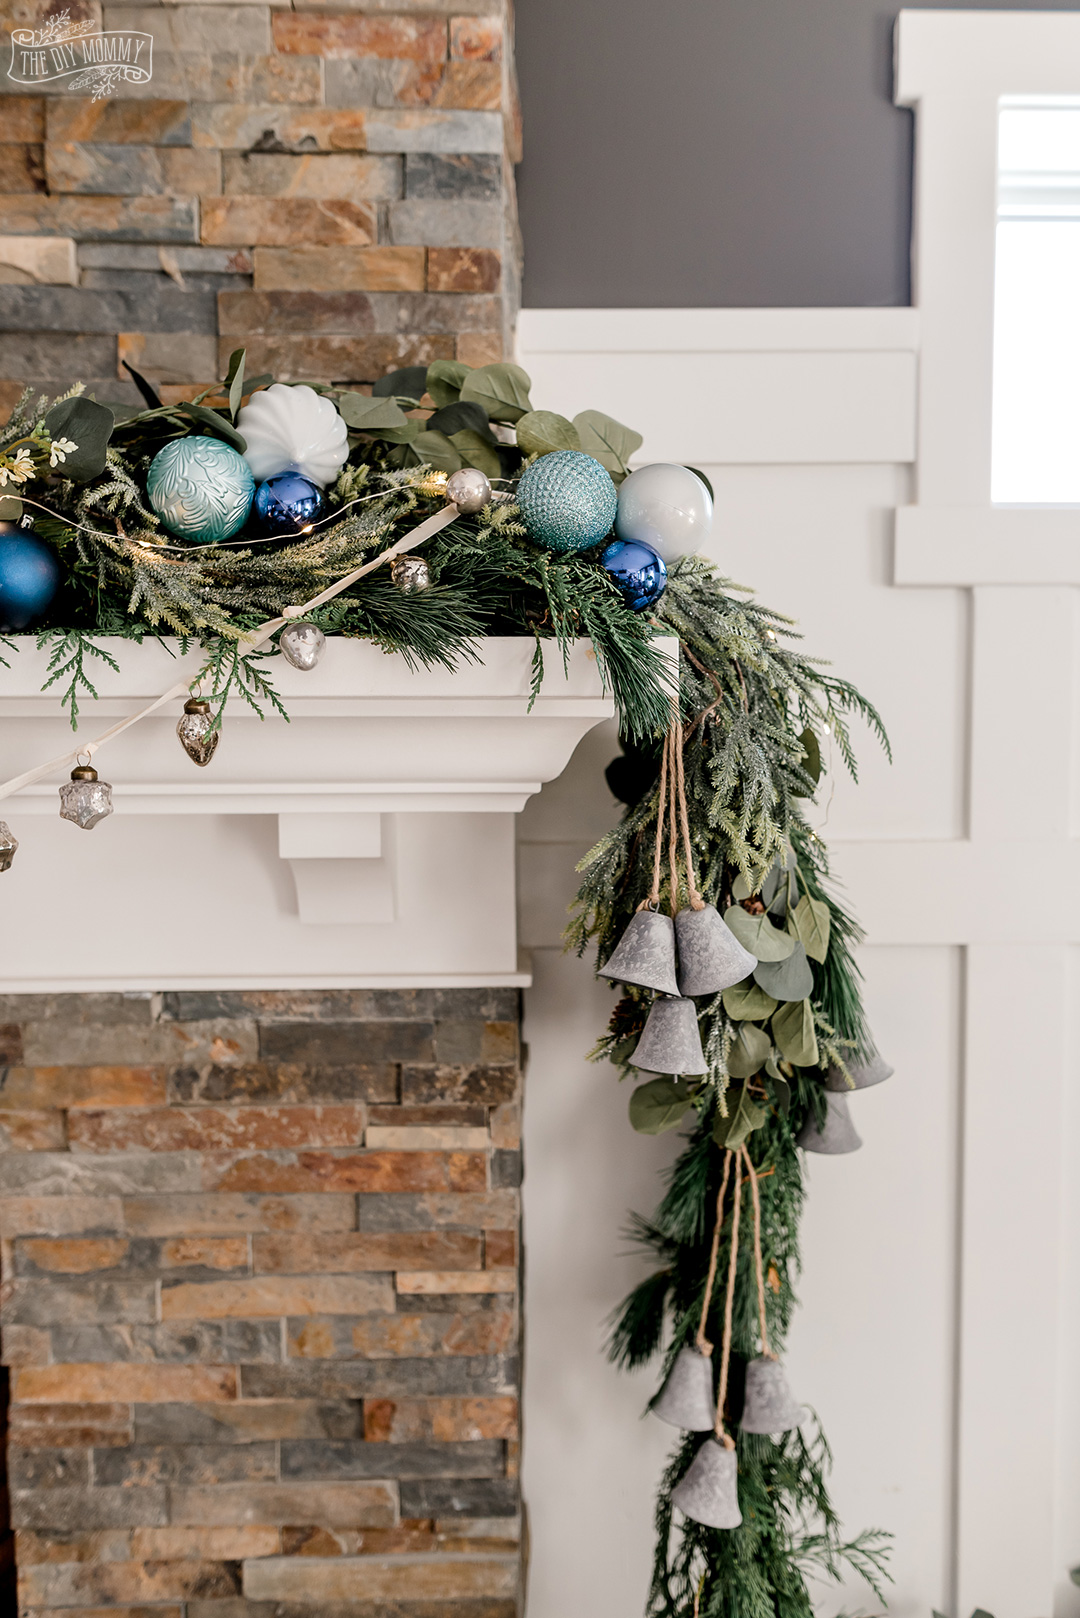 Christmas mantel with asymmetrical fresh greenery, blue colors, metallics, bottle brush trees and knit stockings.